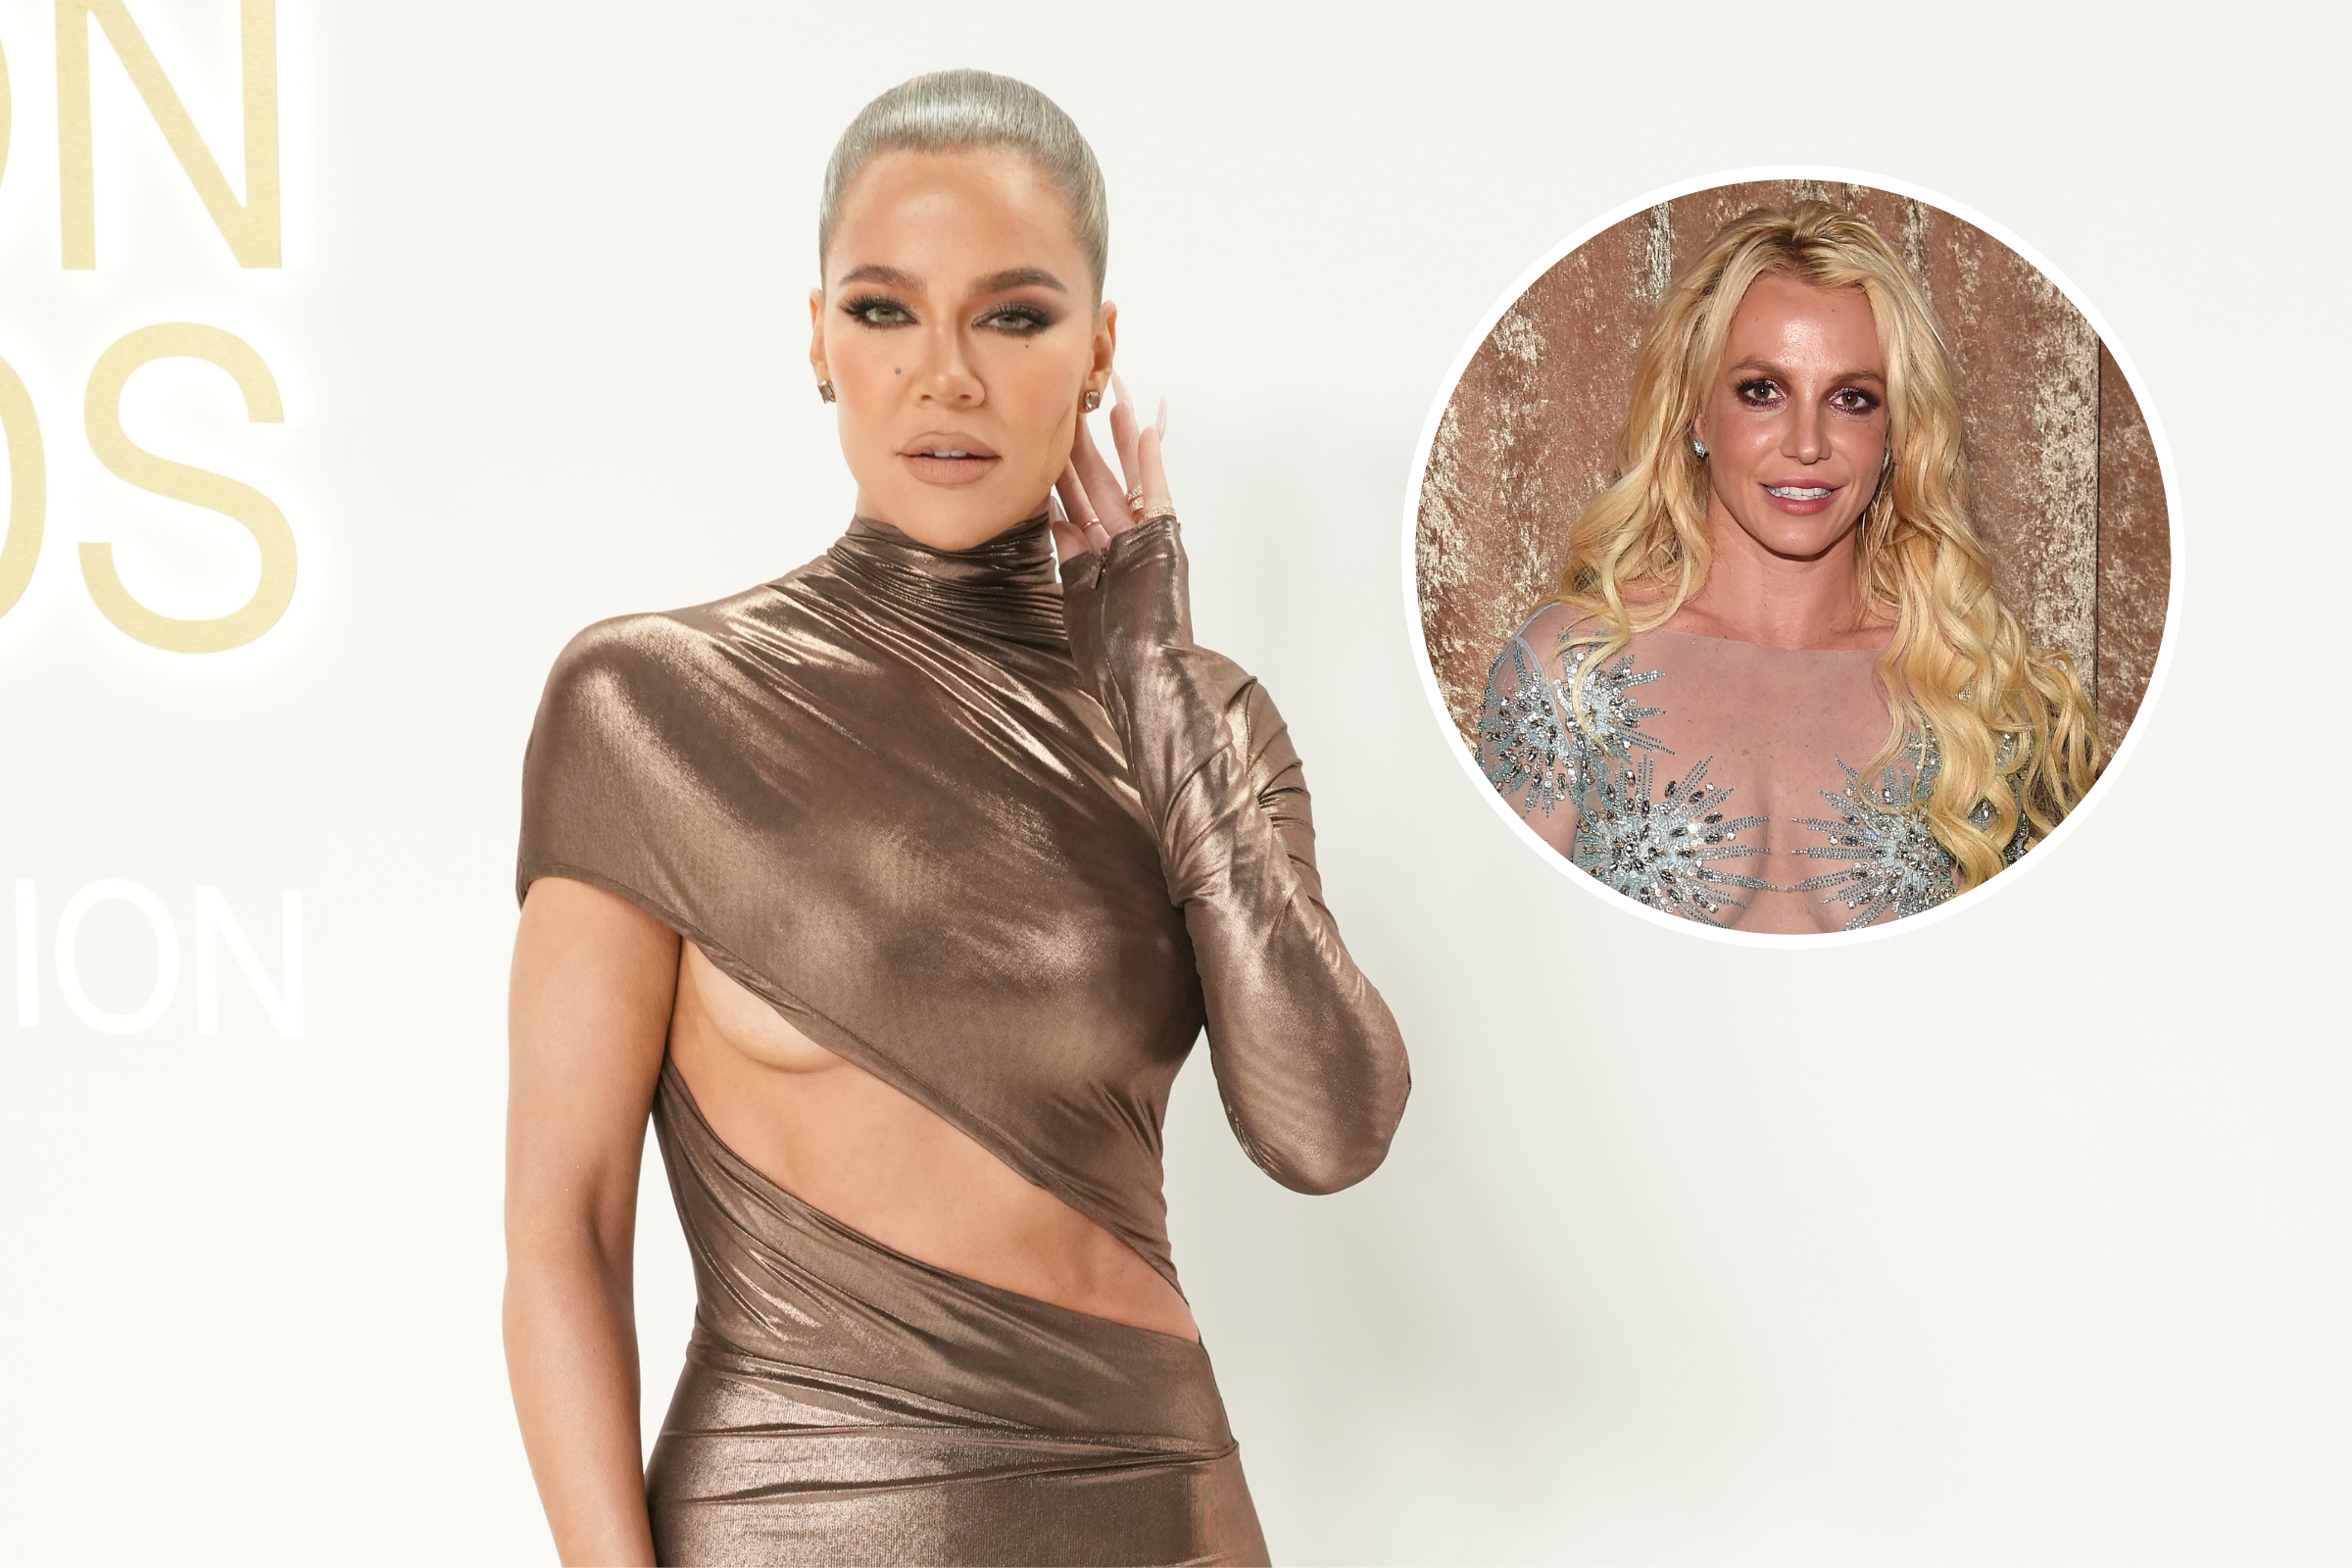 Khloé Kardashian Gives Britney Spears Advice After Hair Compliment